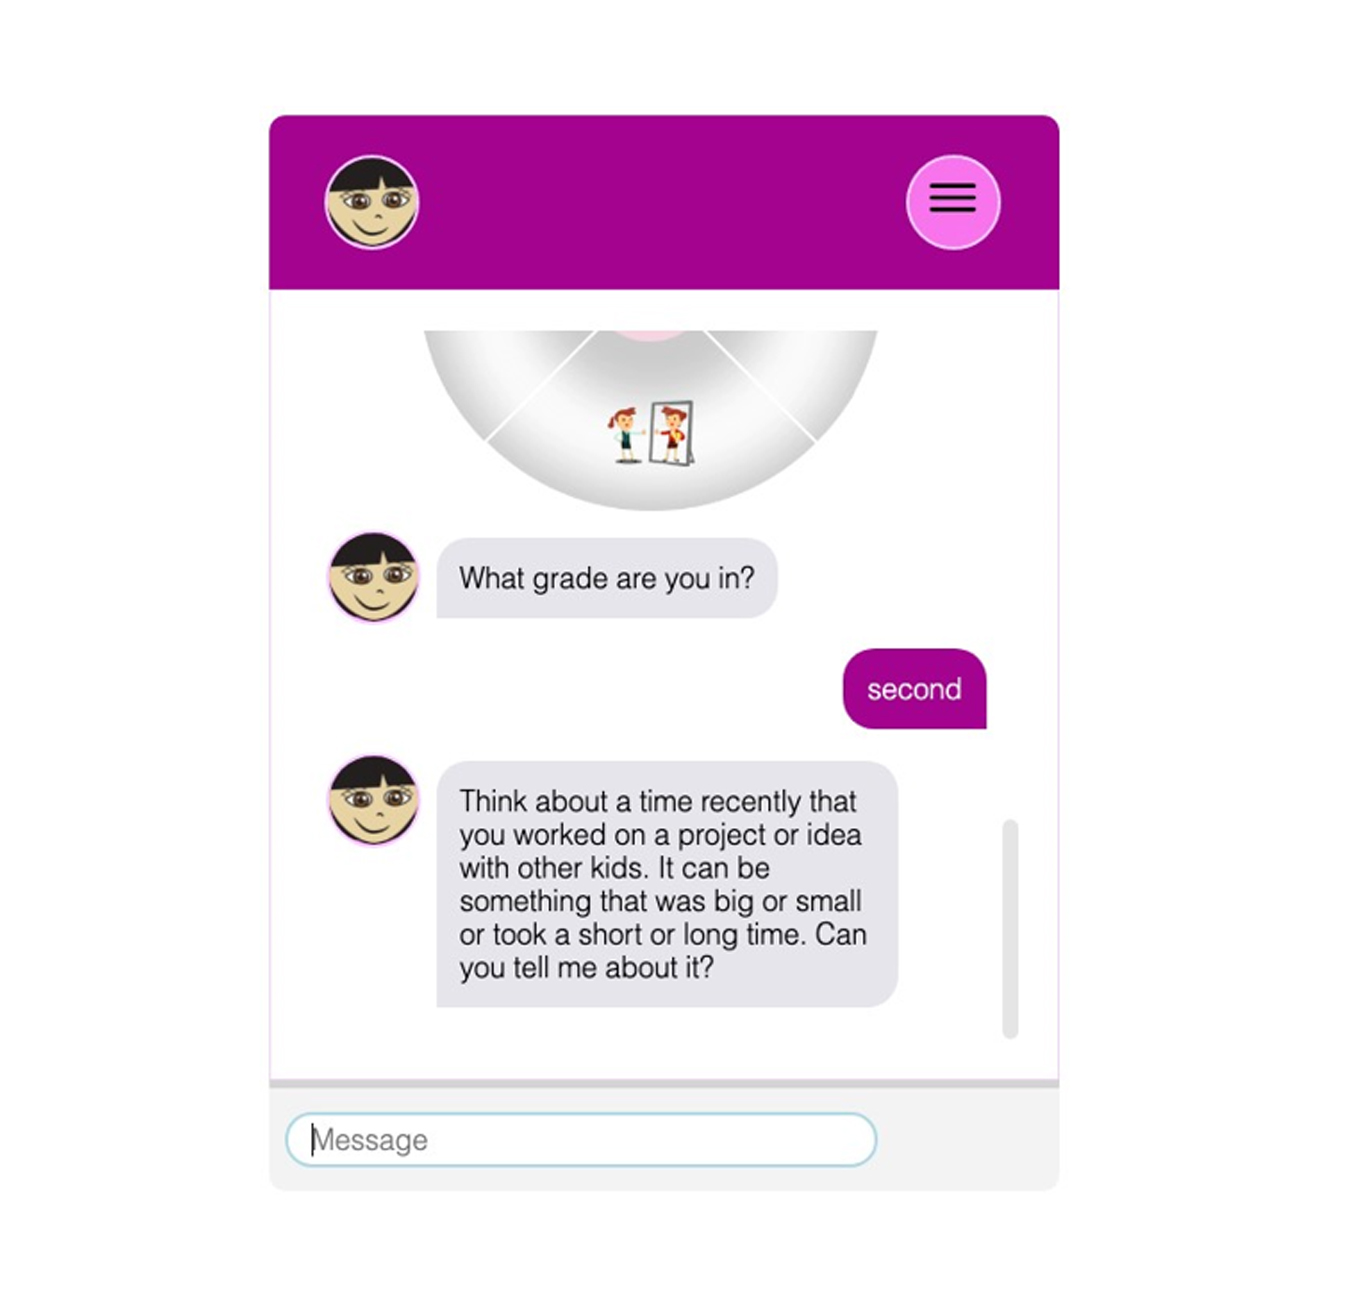 Conversational AI chatbot Ruby designed to simplify and strengthen SEL (Social – Emotional Learning) for students, families and educators.